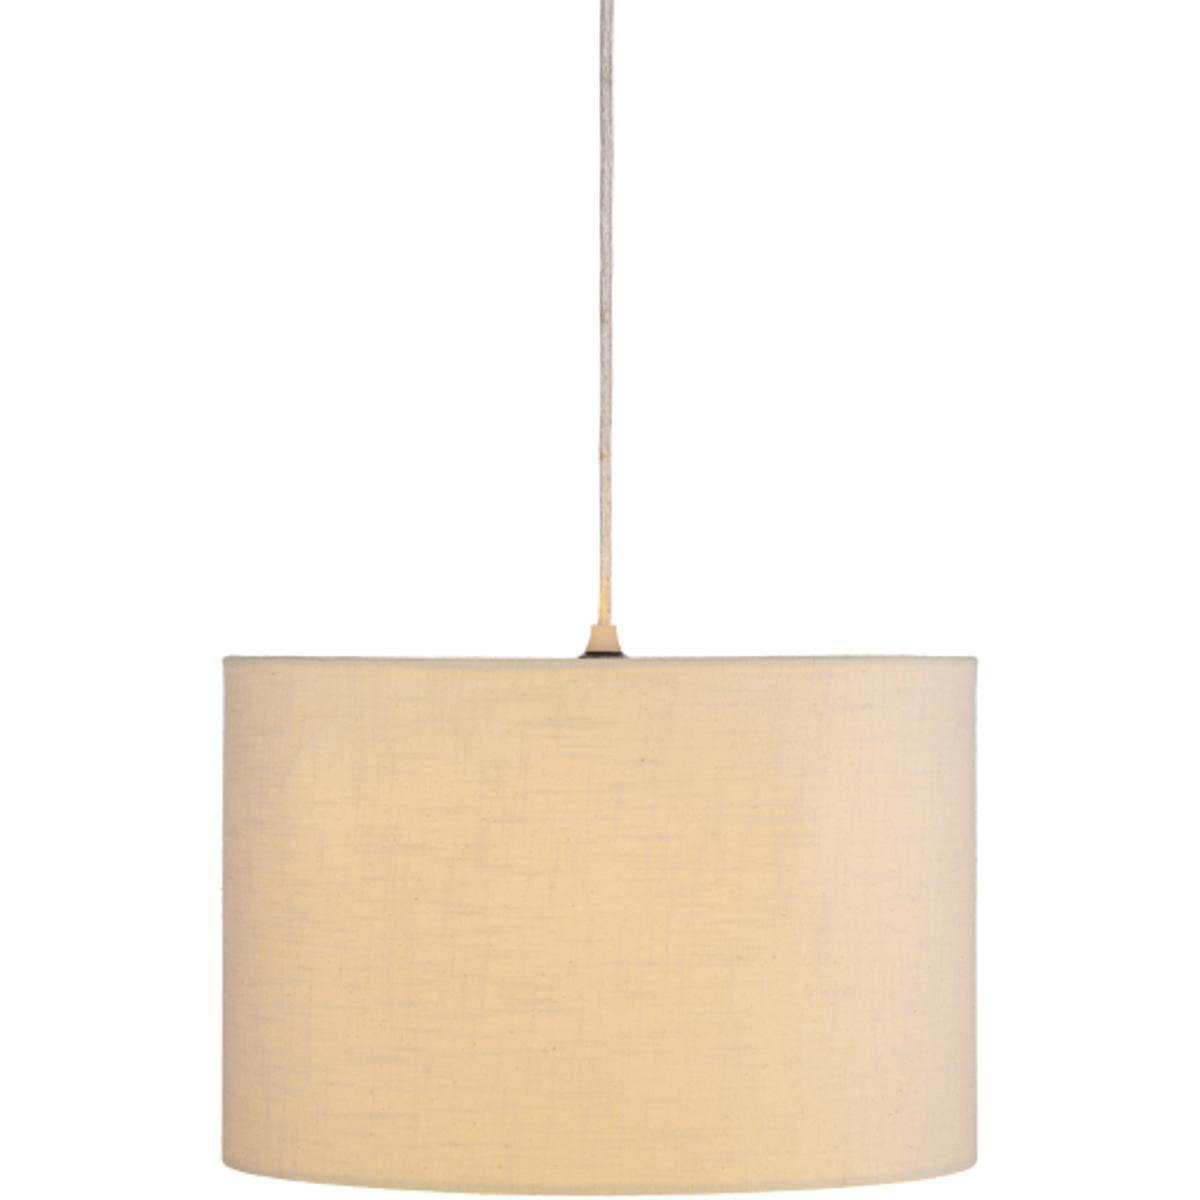 Surya Lonsdale Ceiling Light